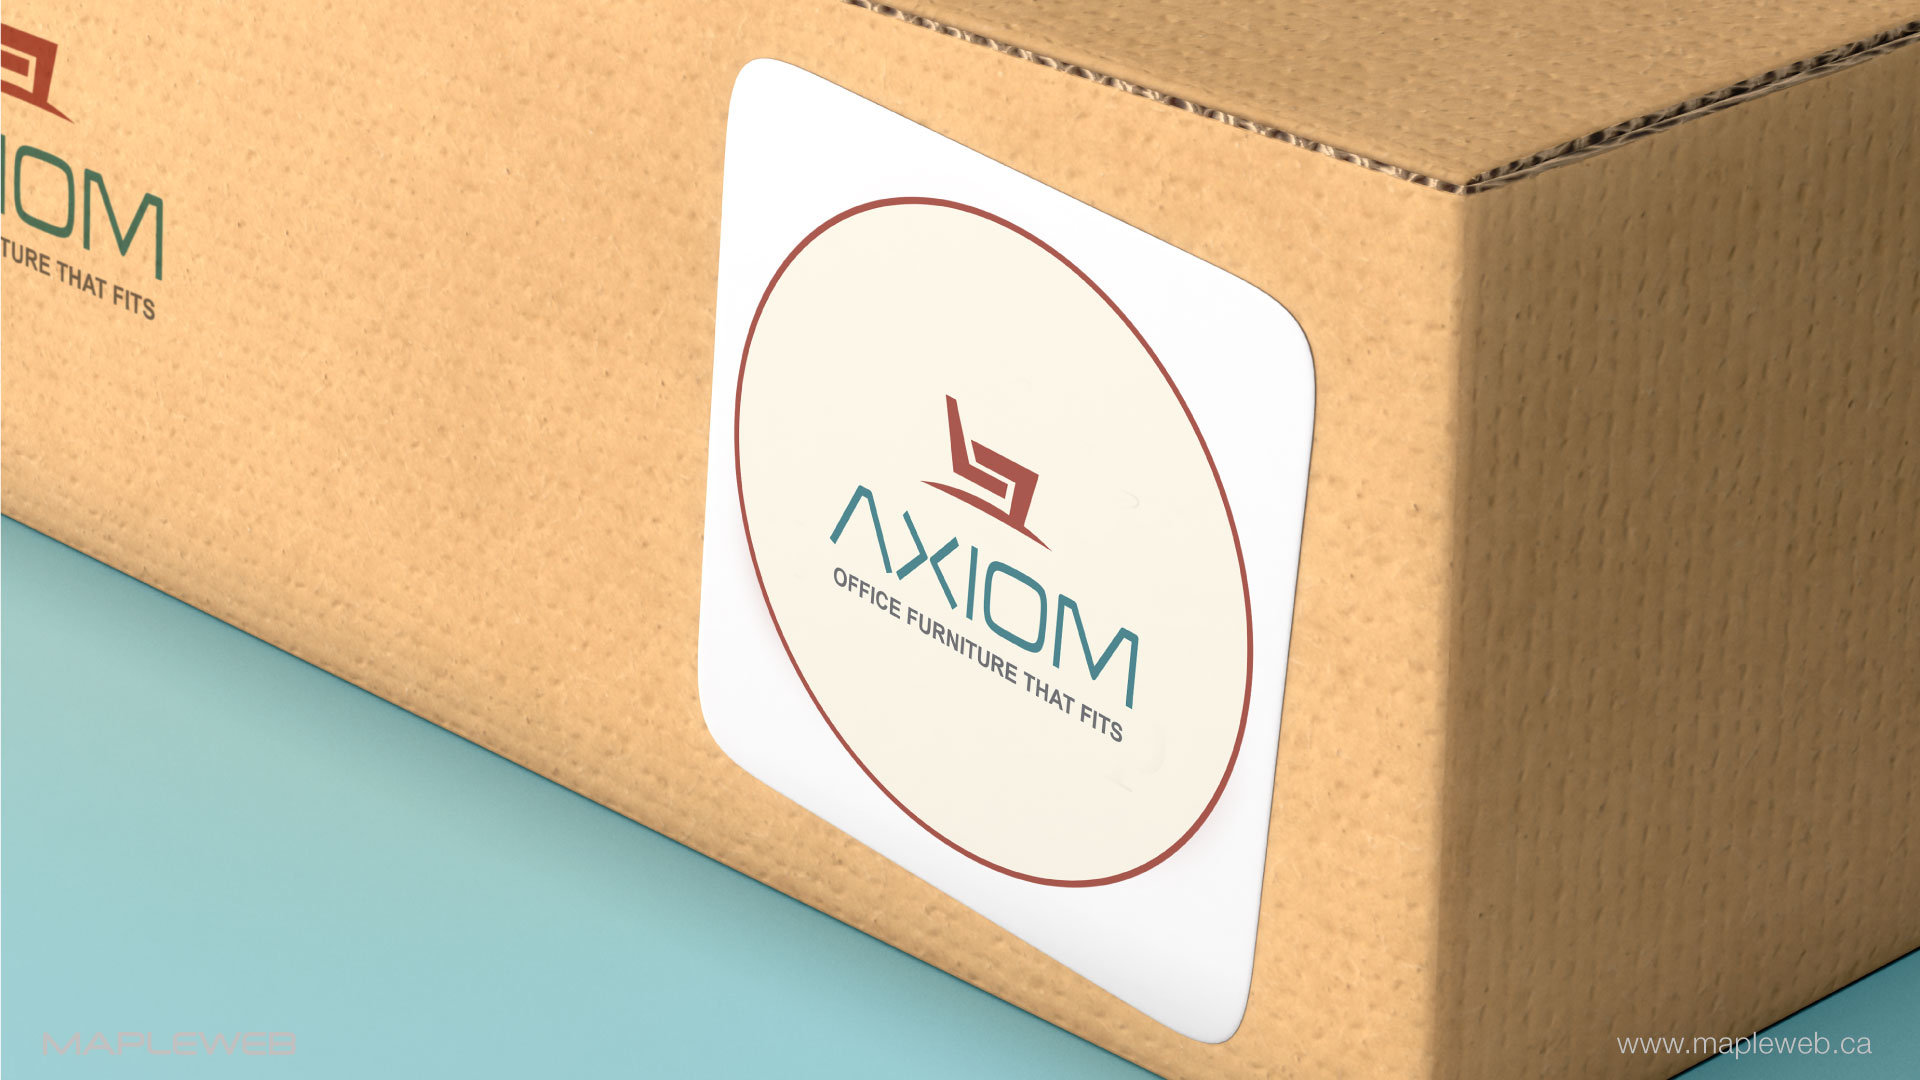 axiom-office furniture-brand-logo-design-by-mapleweb-vancouver-canada-packaging-mock